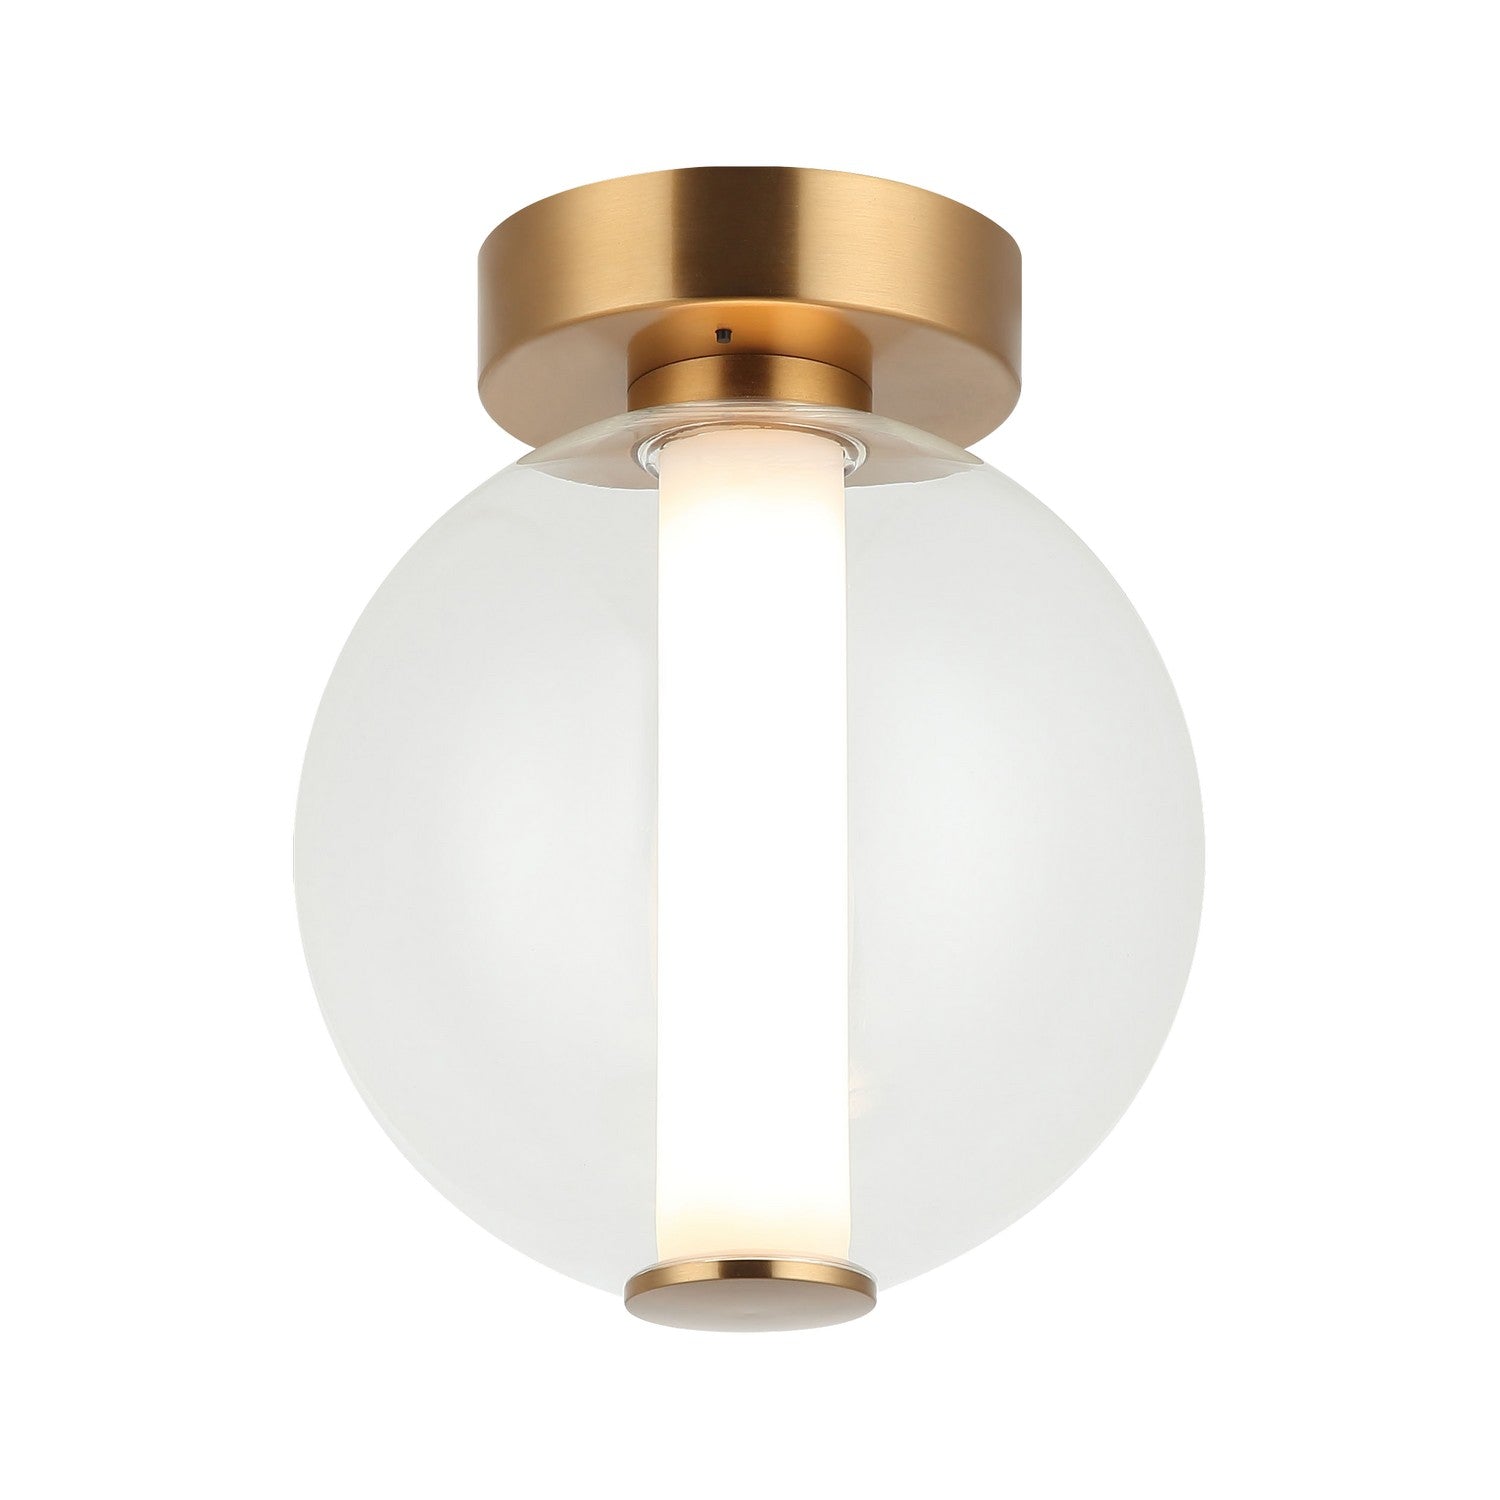 Matteo Canada - WX69611AGCL - LED Wall Sconce/Ceiling Mount - Belange - Aged Gold Brass